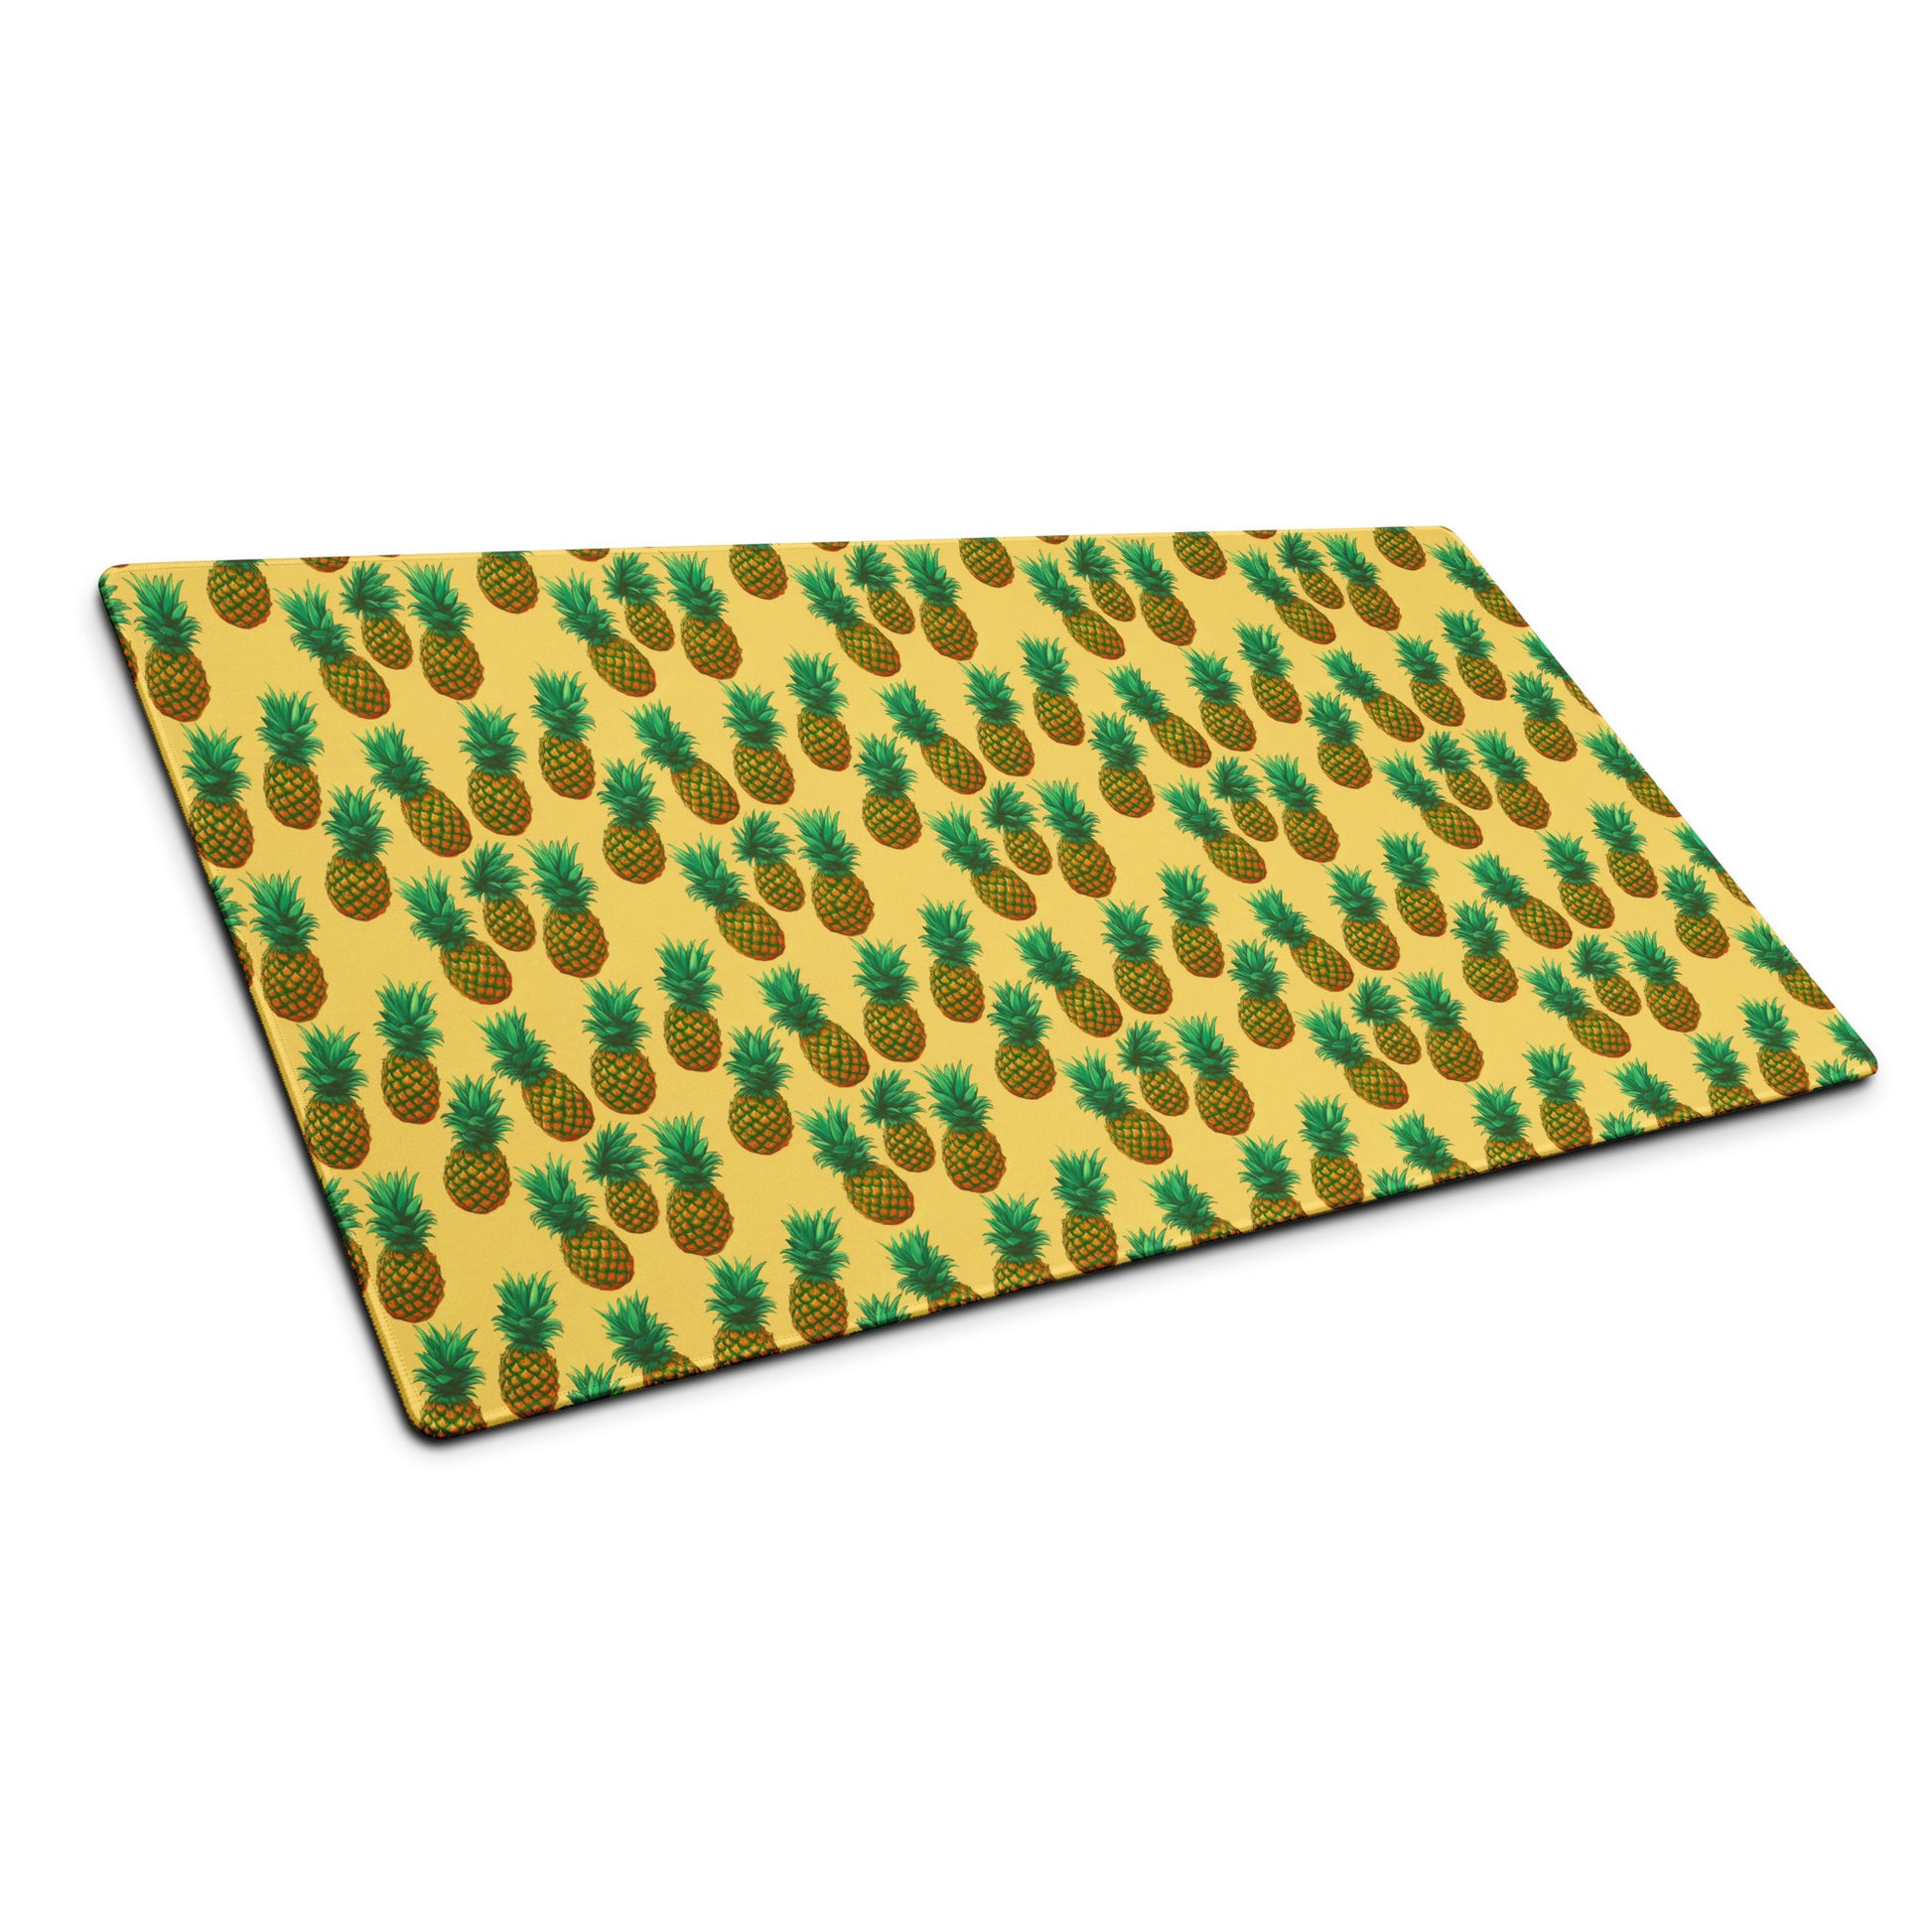 A 36" x 18" desk pad with pineapples all over it shown at an angle. Yellow in color.